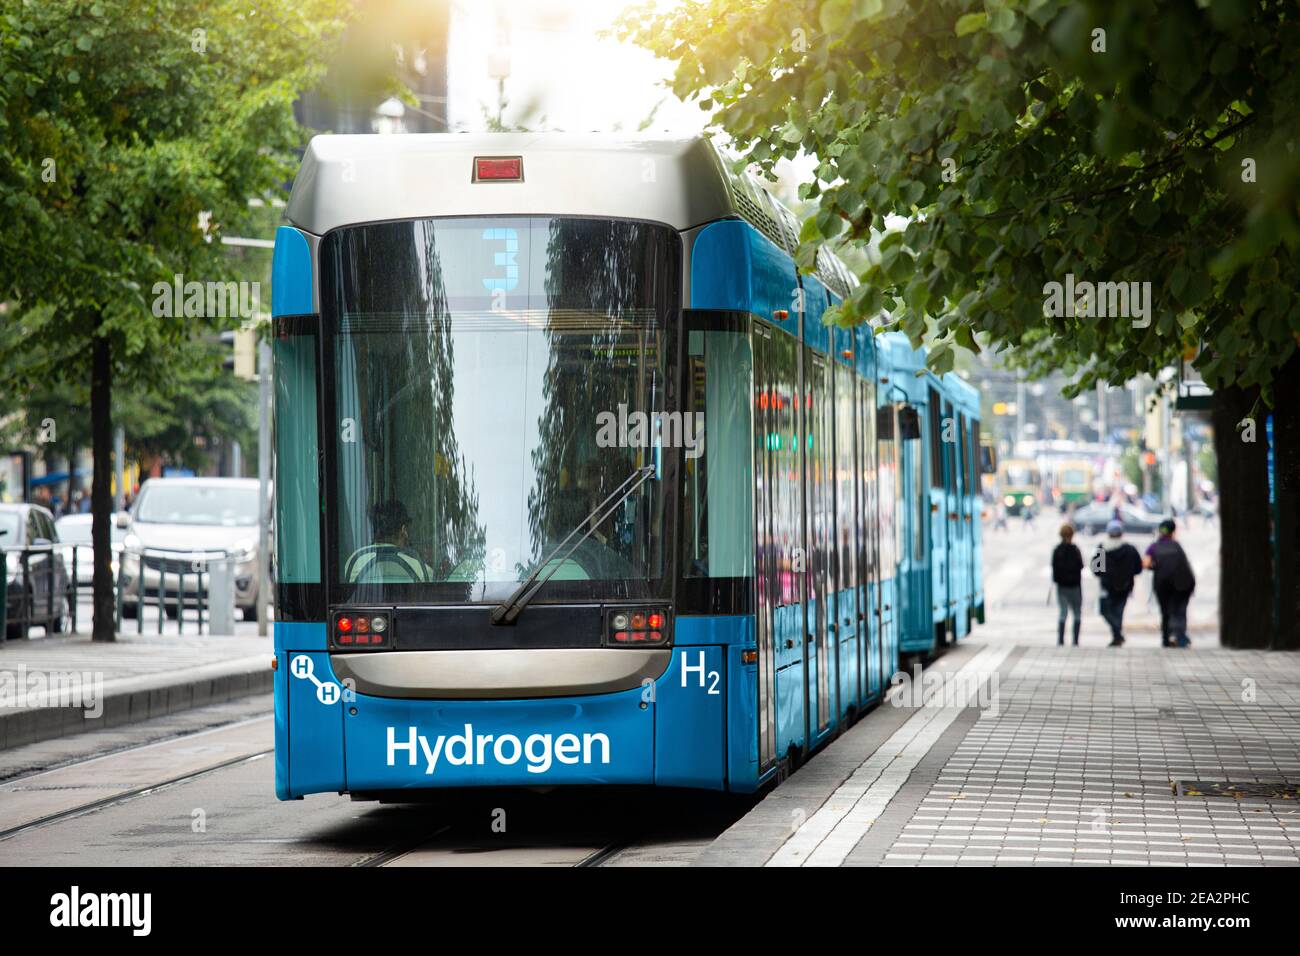 A hydrogen fuel cell tram on a city street Stock Photo